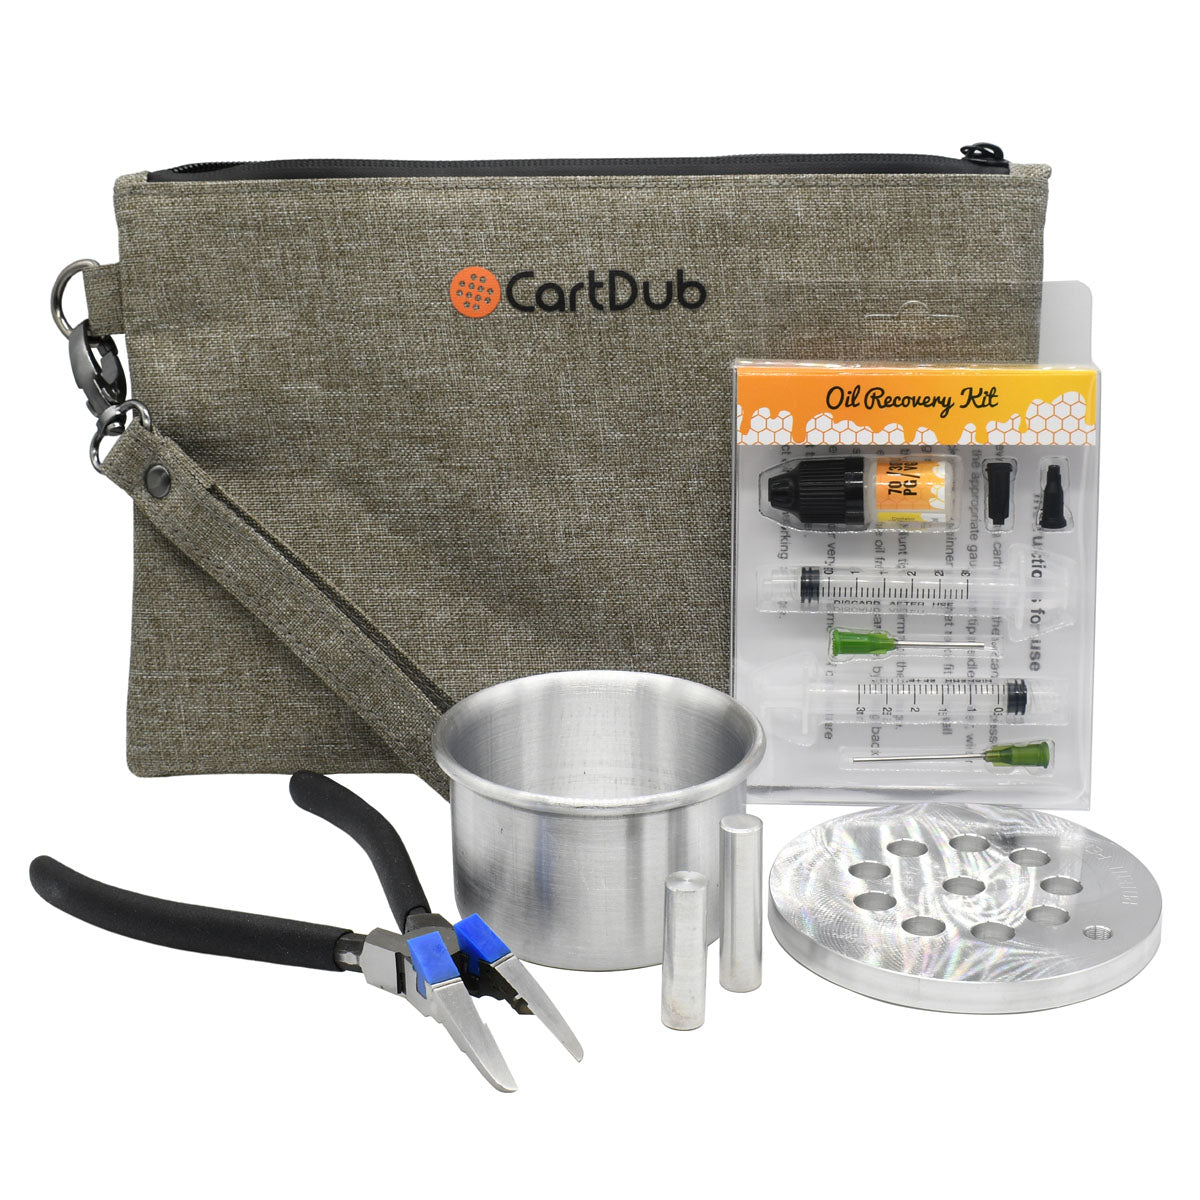 CartDub Cartridge Oil Removal Kit With Smell Proof Bag